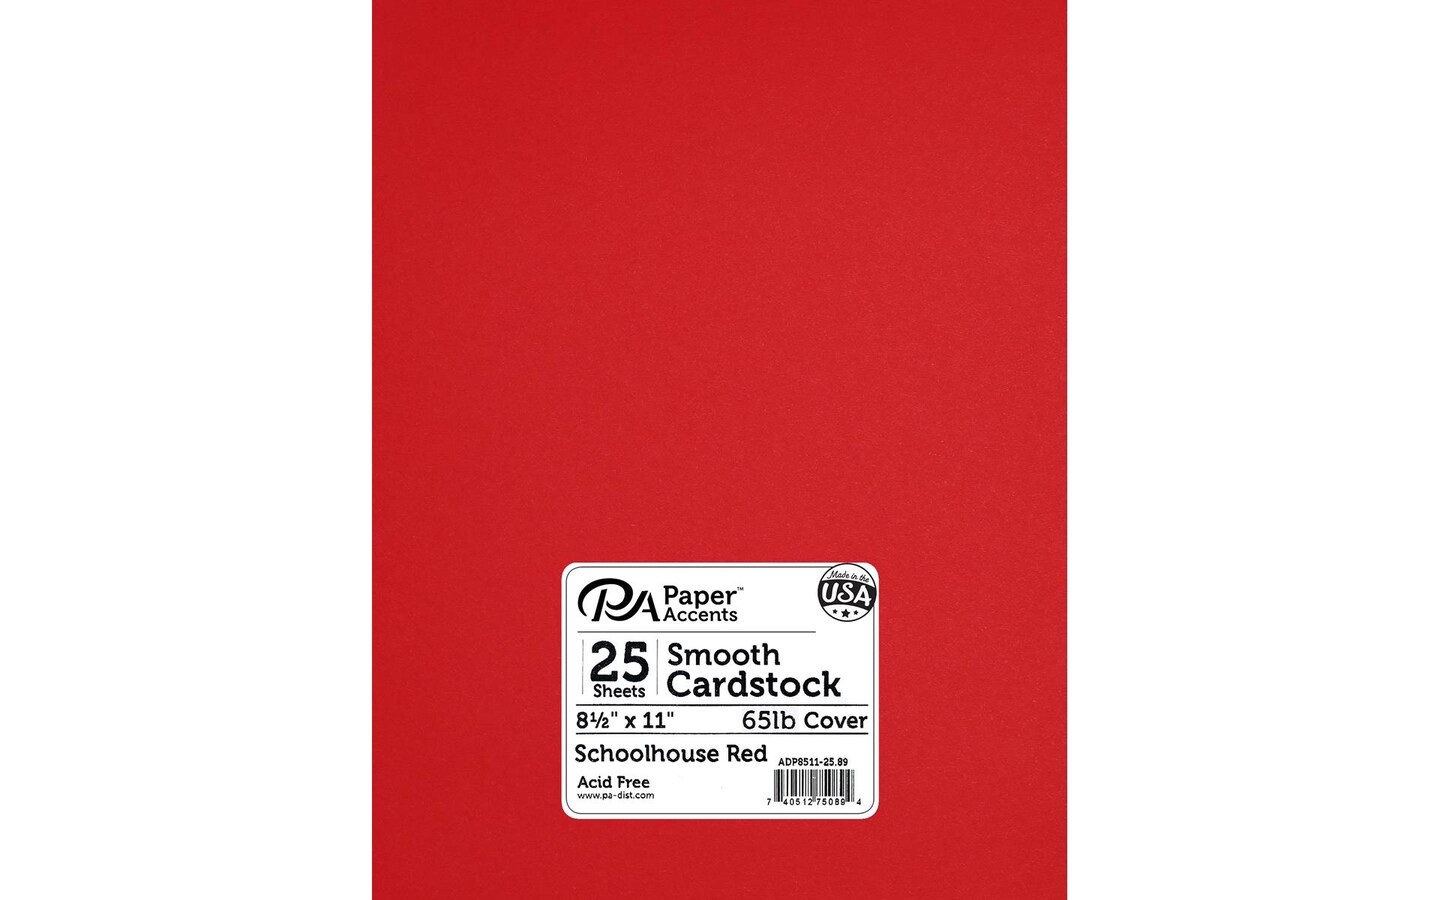 PA Paper Accents Smooth Cardstock 8.5&#x22; x 11&#x22; Schoolhouse Red, 65lb colored cardstock paper for card making, scrapbooking, printing, quilling and crafts, 25 piece pack